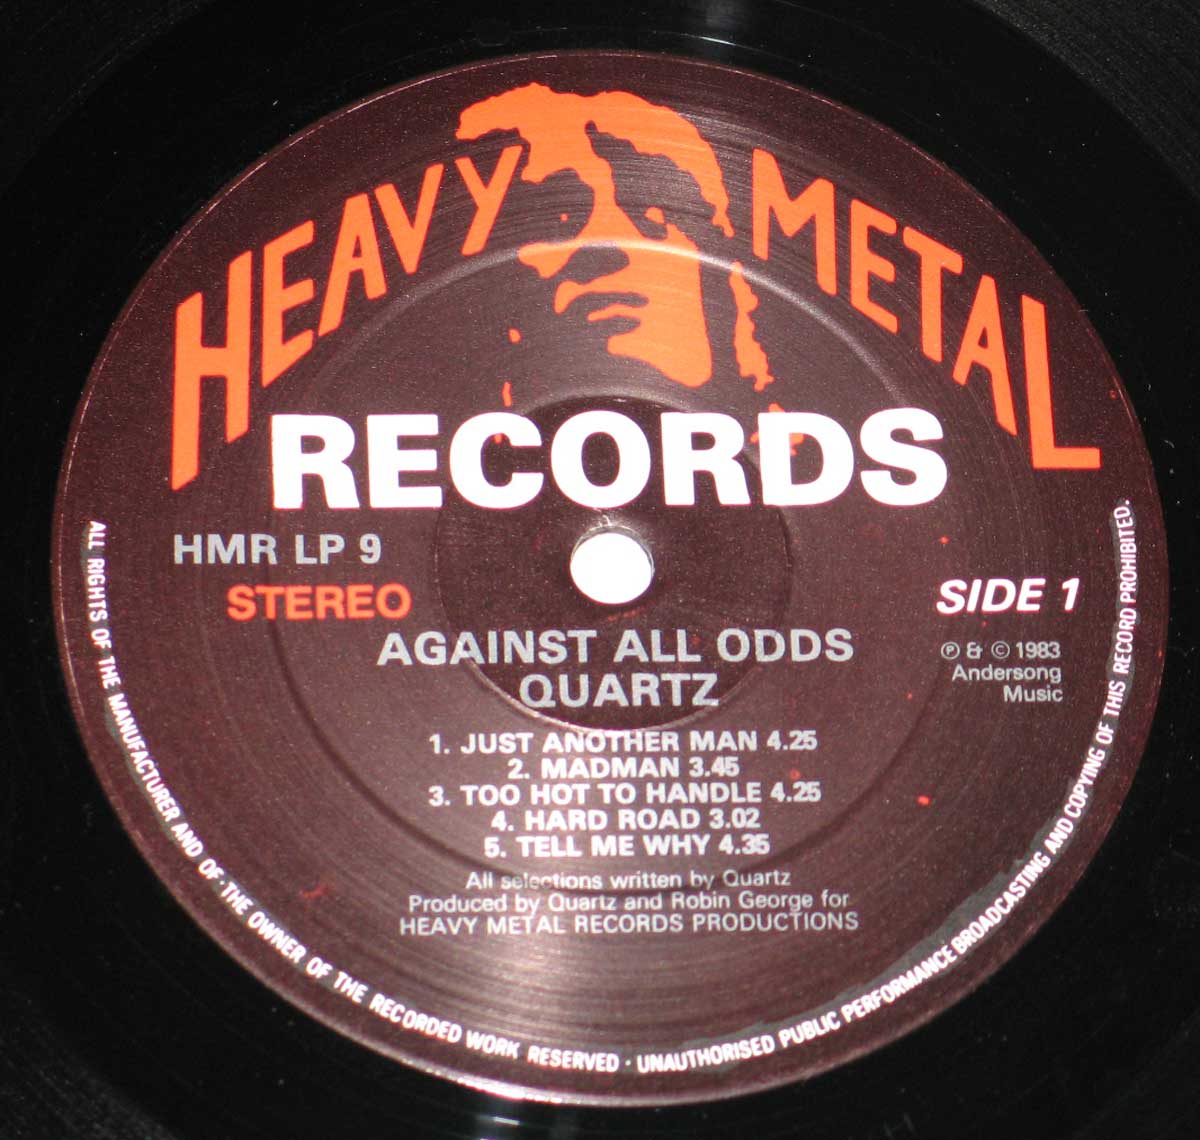 Close-up Photo of the "Heavy Metal Reocrds" HMR LP 9 Record Label of "Against All Odds"  